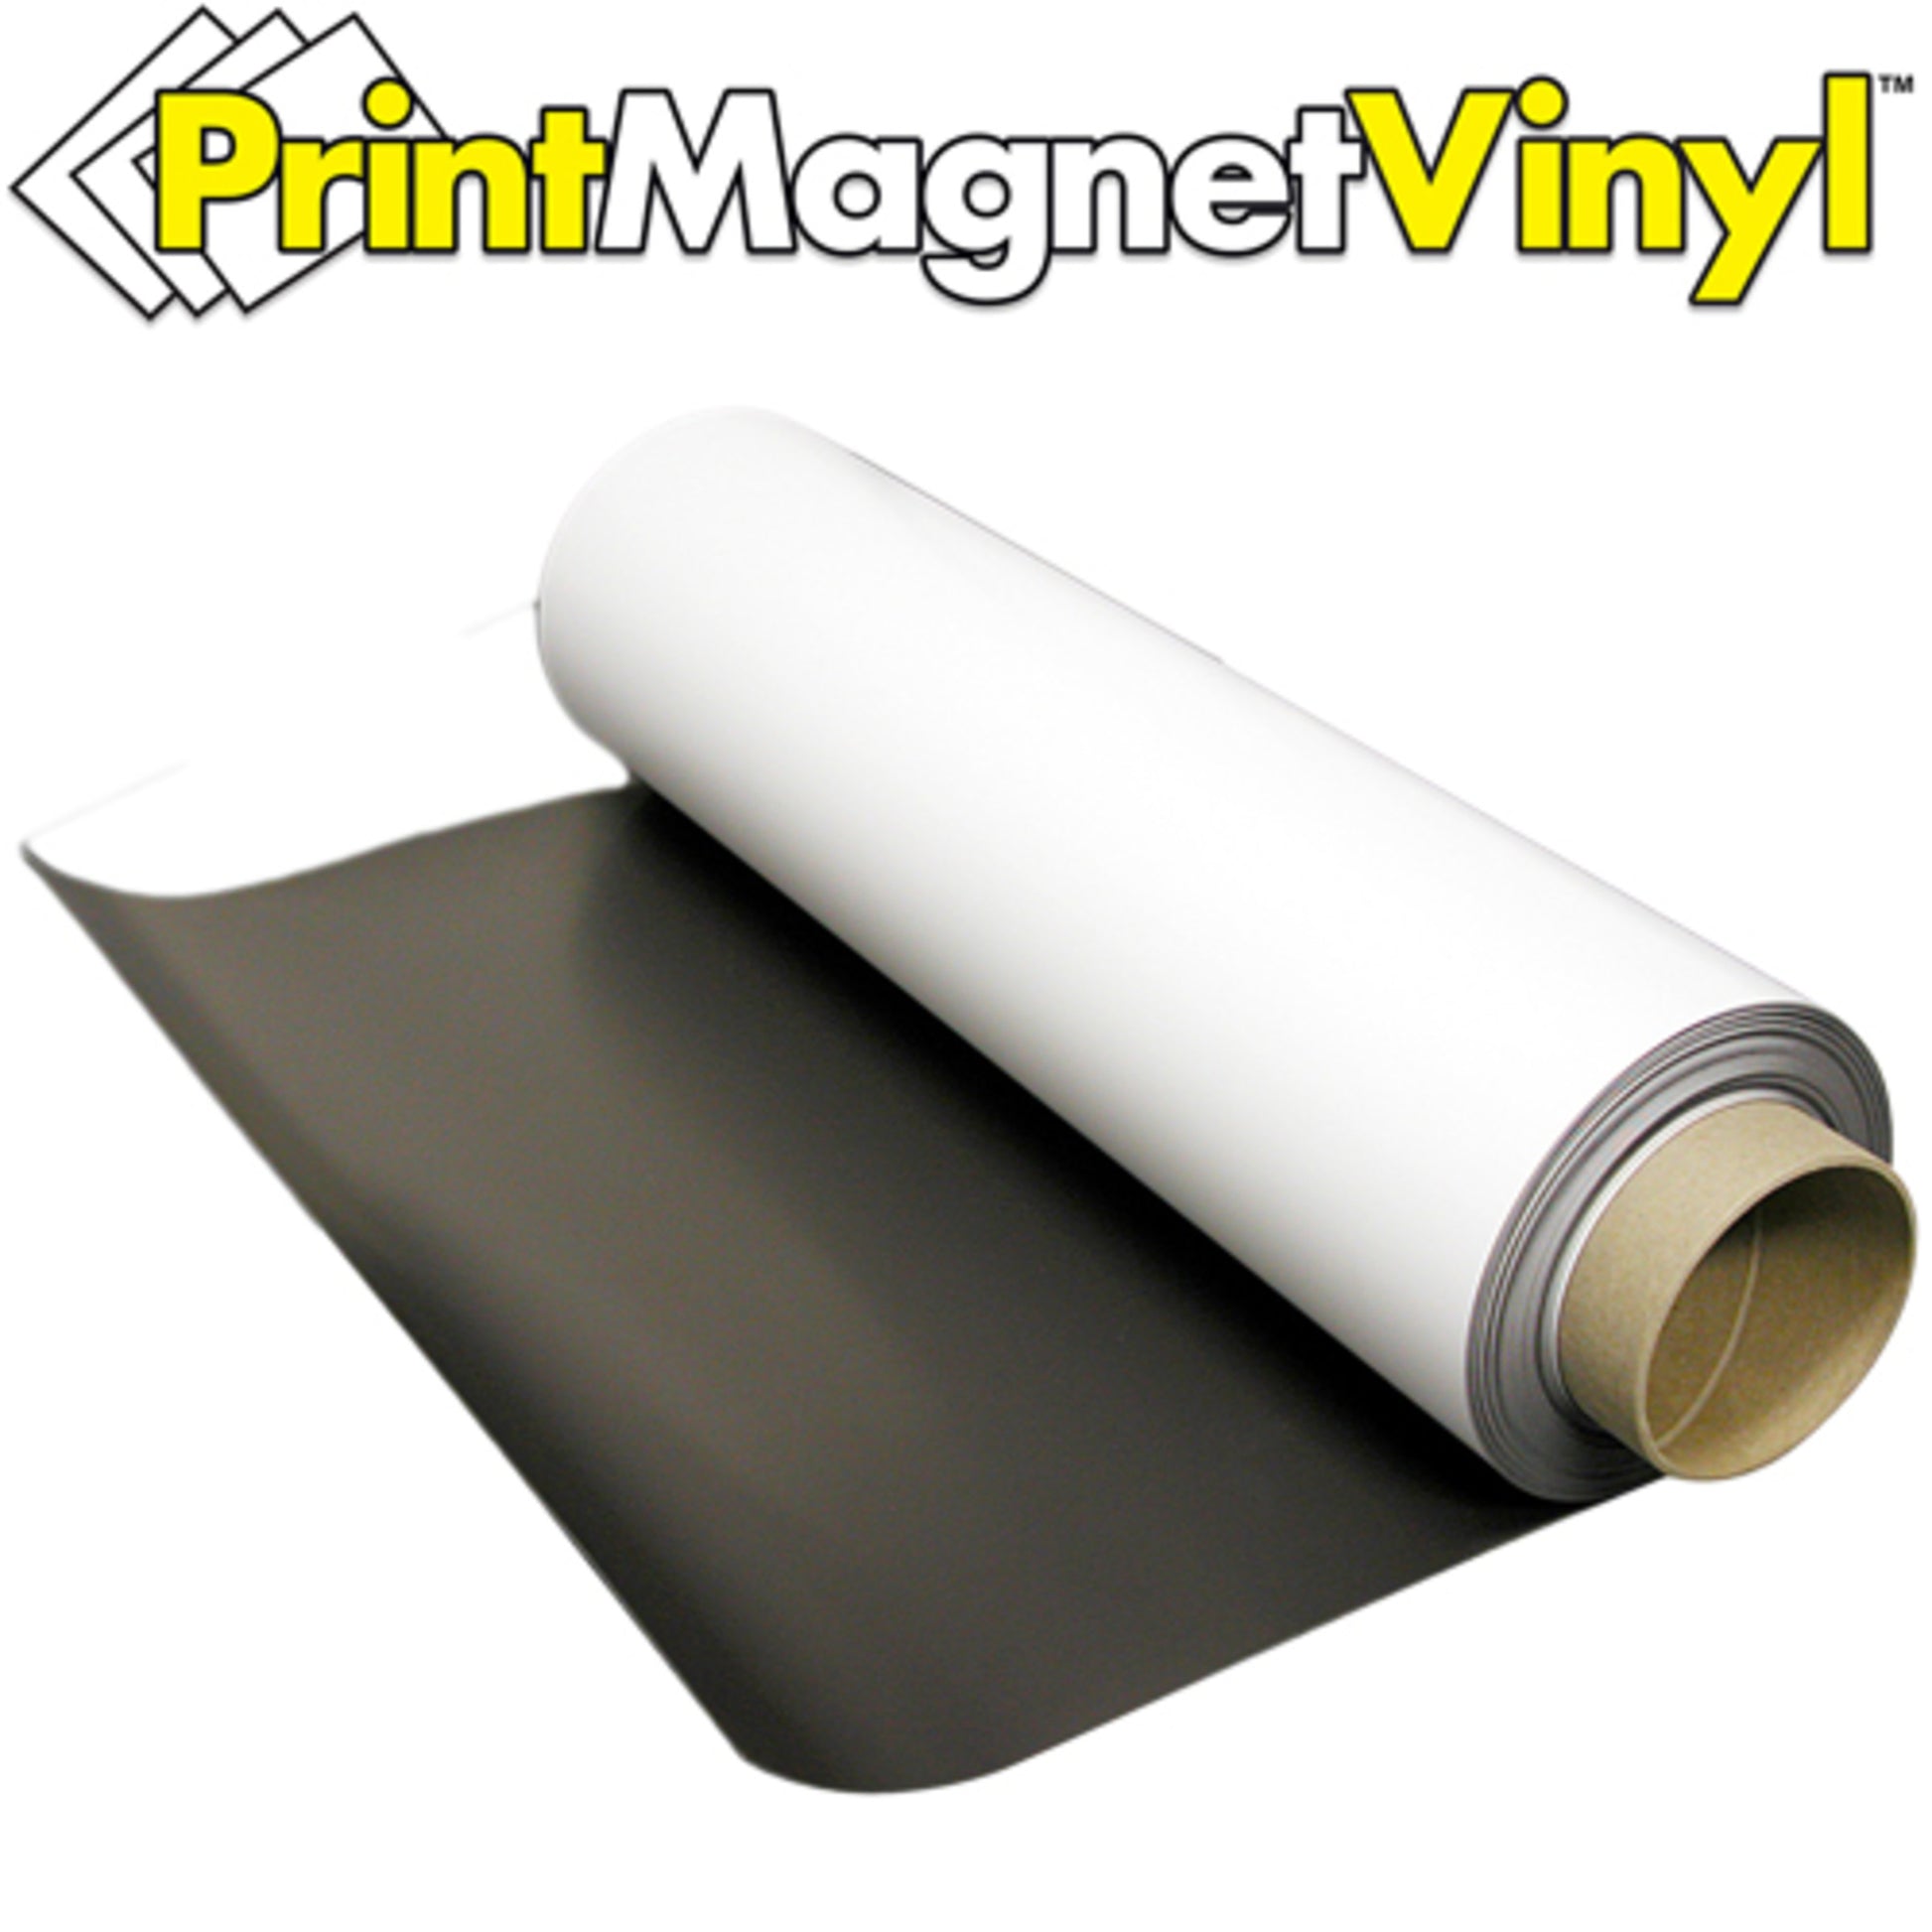 Load image into Gallery viewer, ZGN3048GW50 PrintMagnetVinyl™ Flexible Magnetic Sheet - In Use